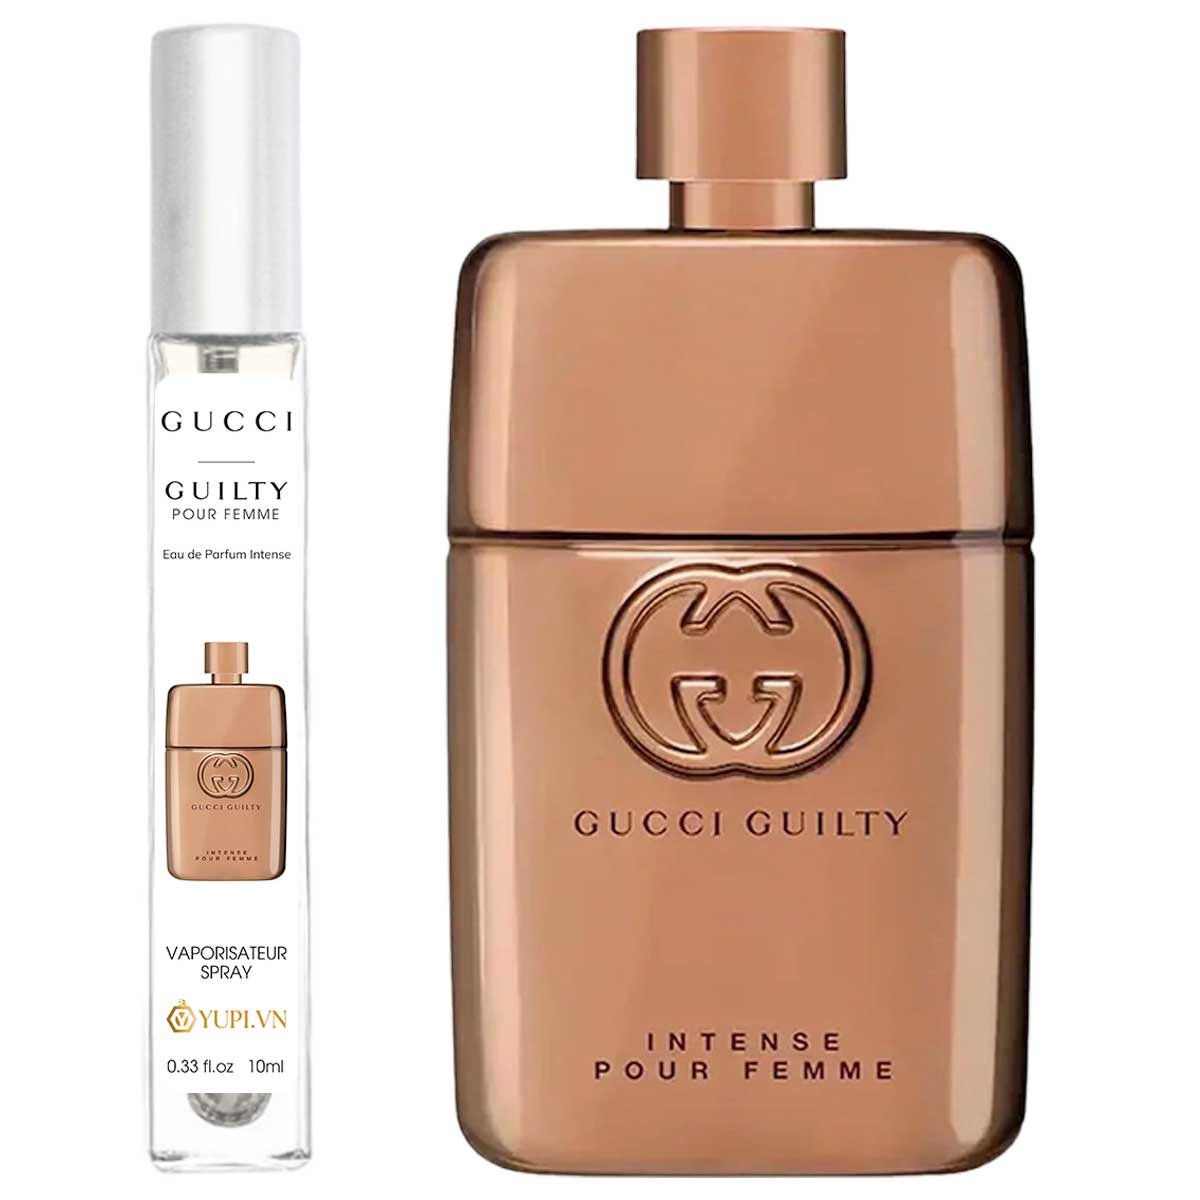 Gucci Guilty Pour Femme EDP Intense Chiết 10ml